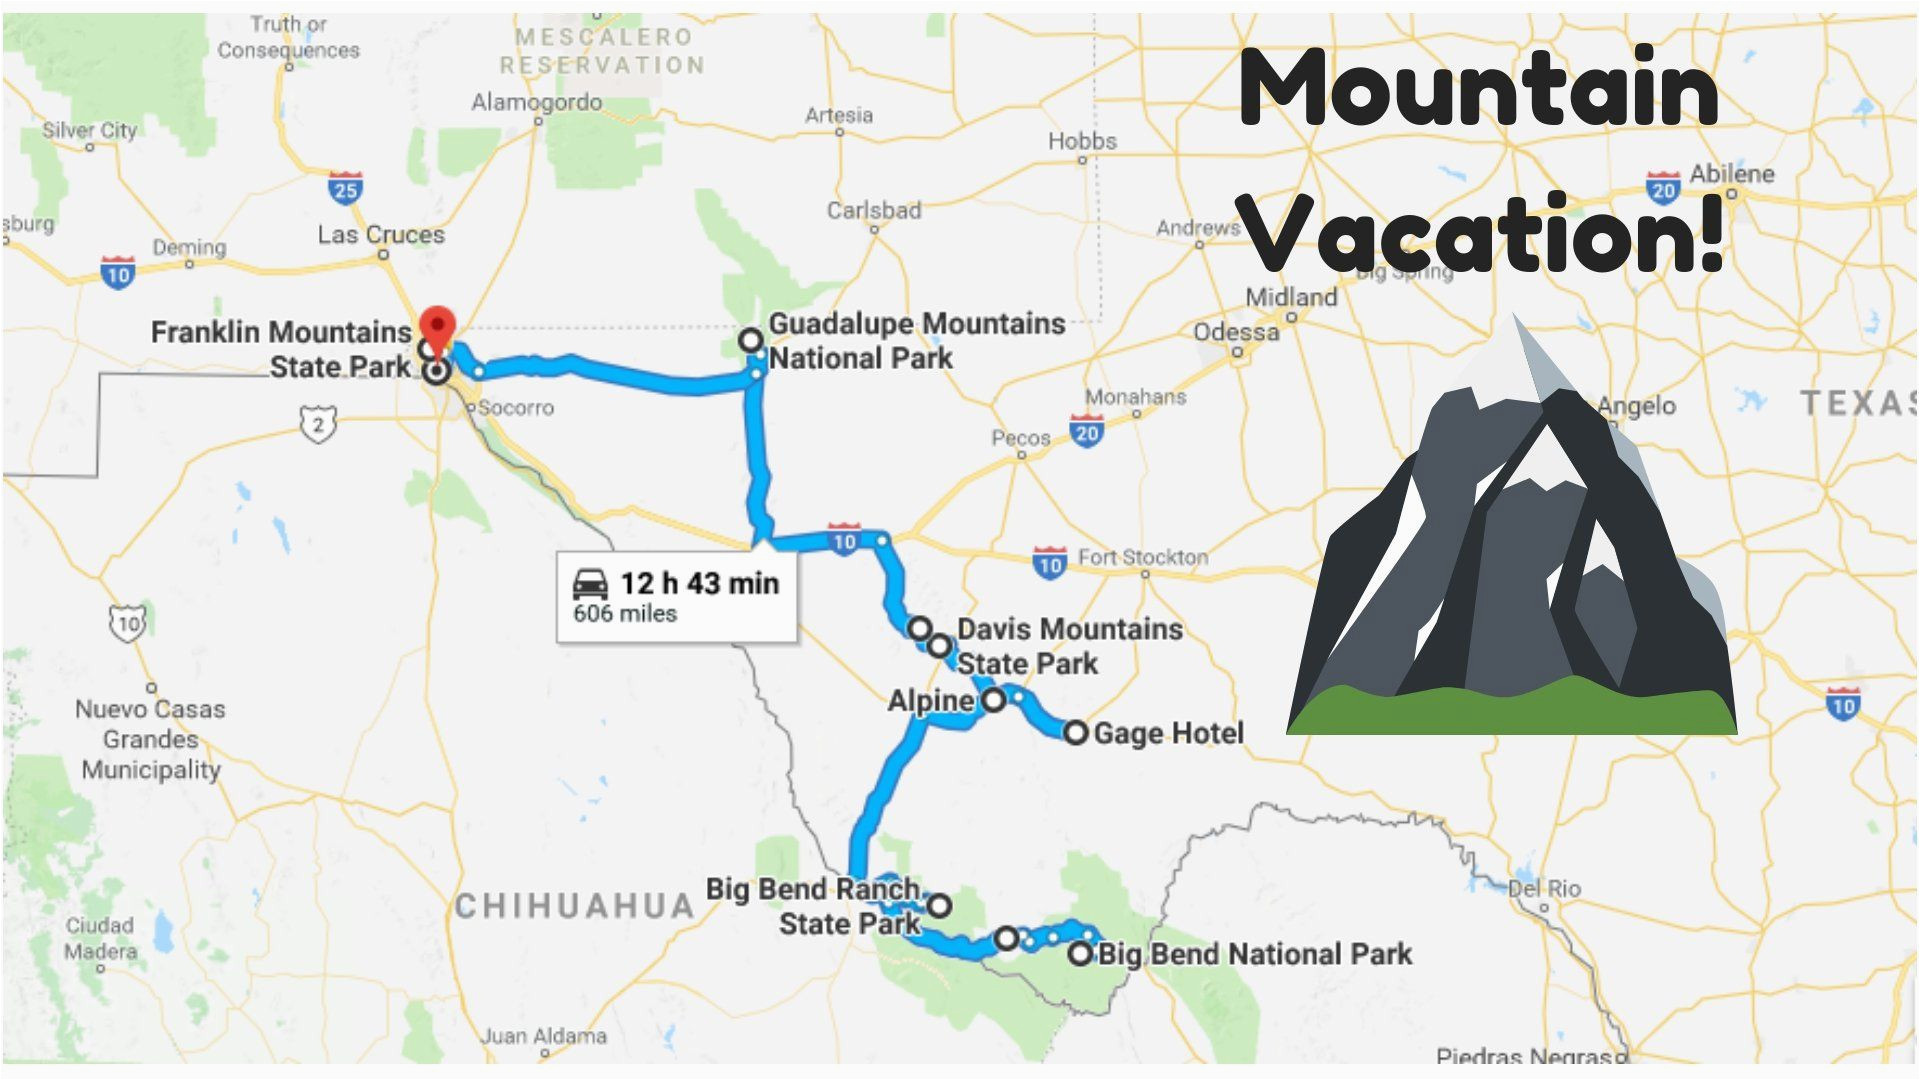 everyone from texas should take this awesome mountain vacation